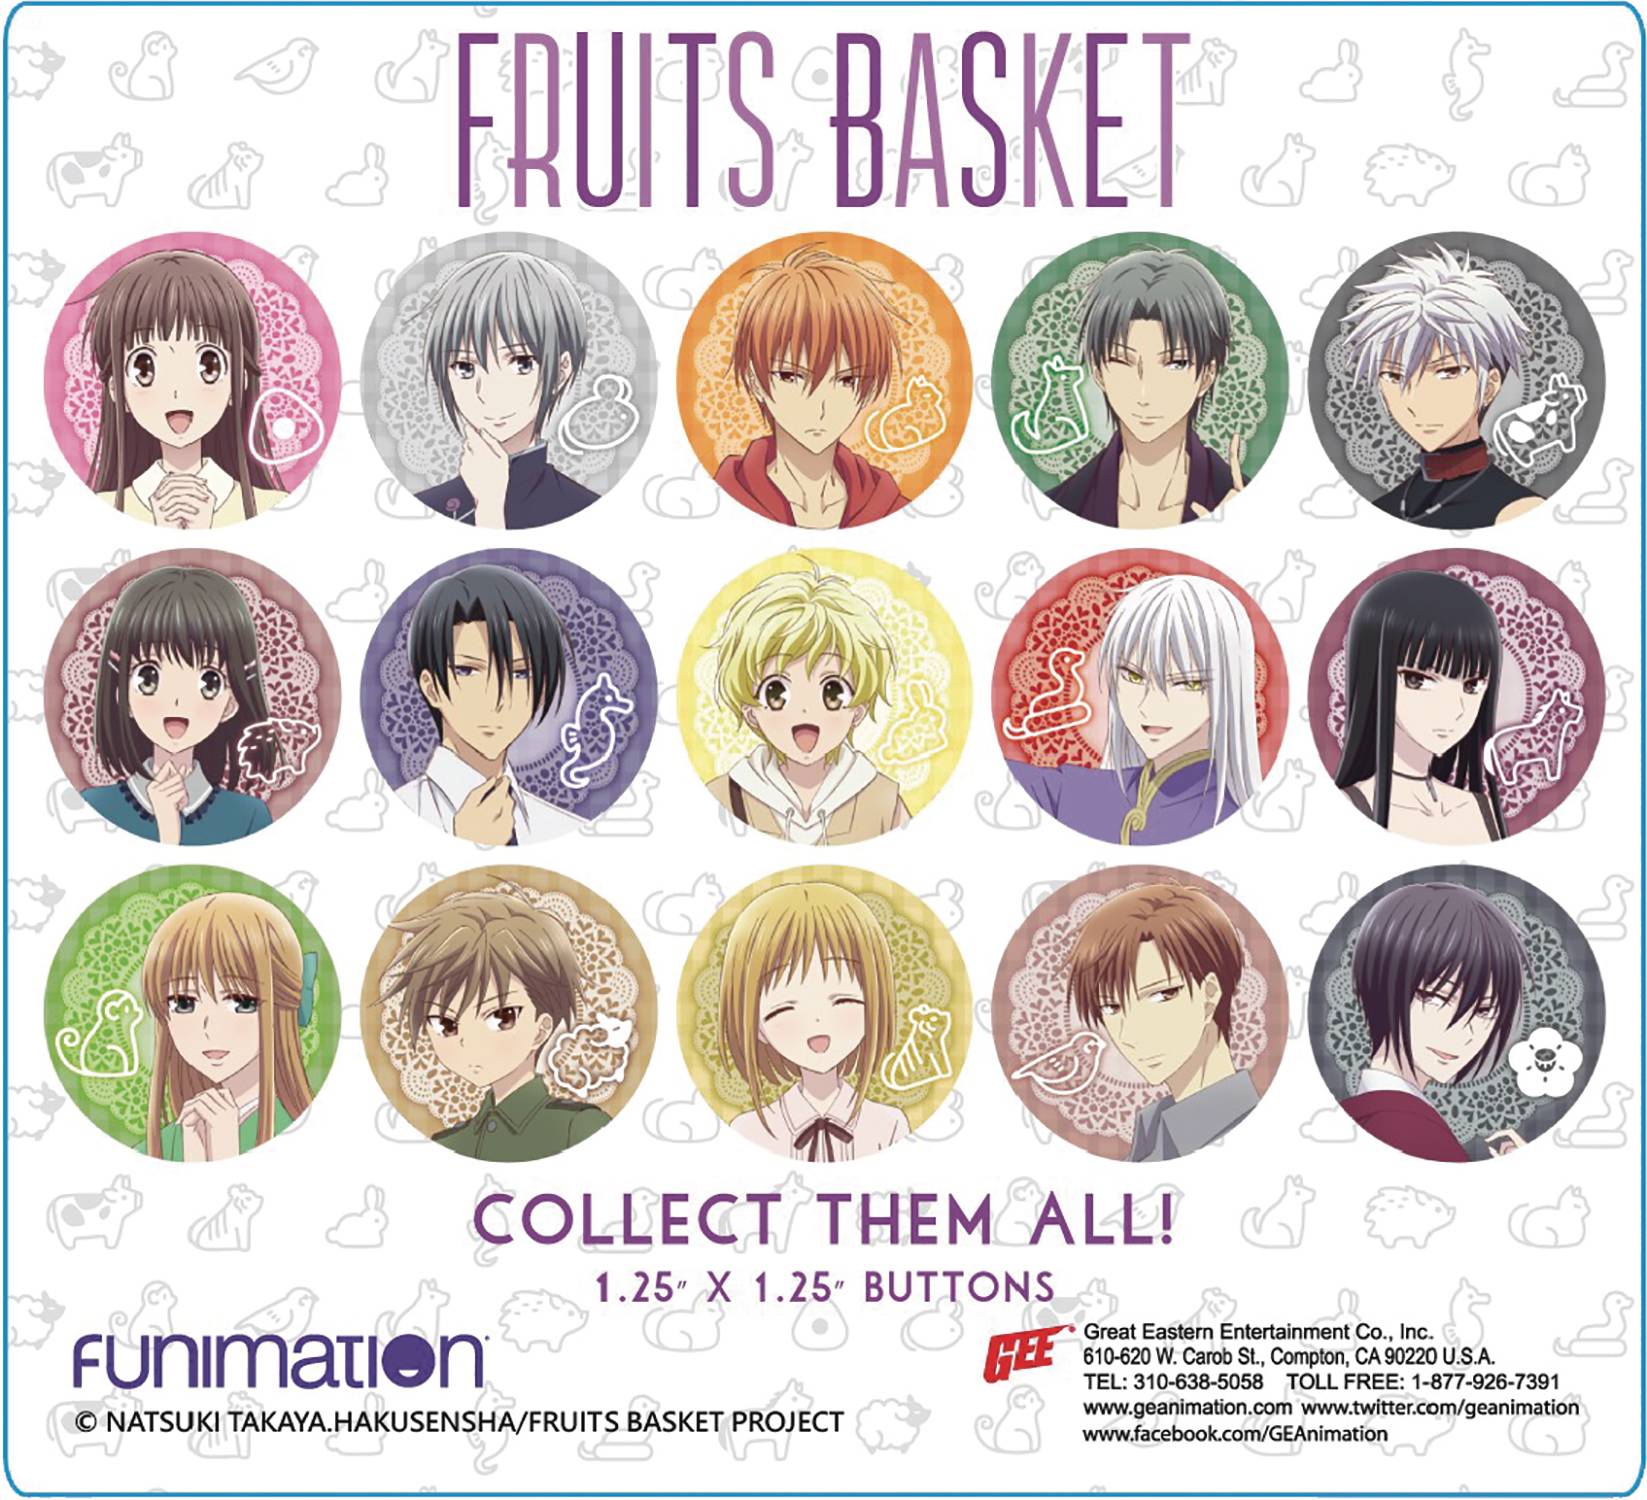 Fruits Basket 2019 Characters Ranked by Their Backstories